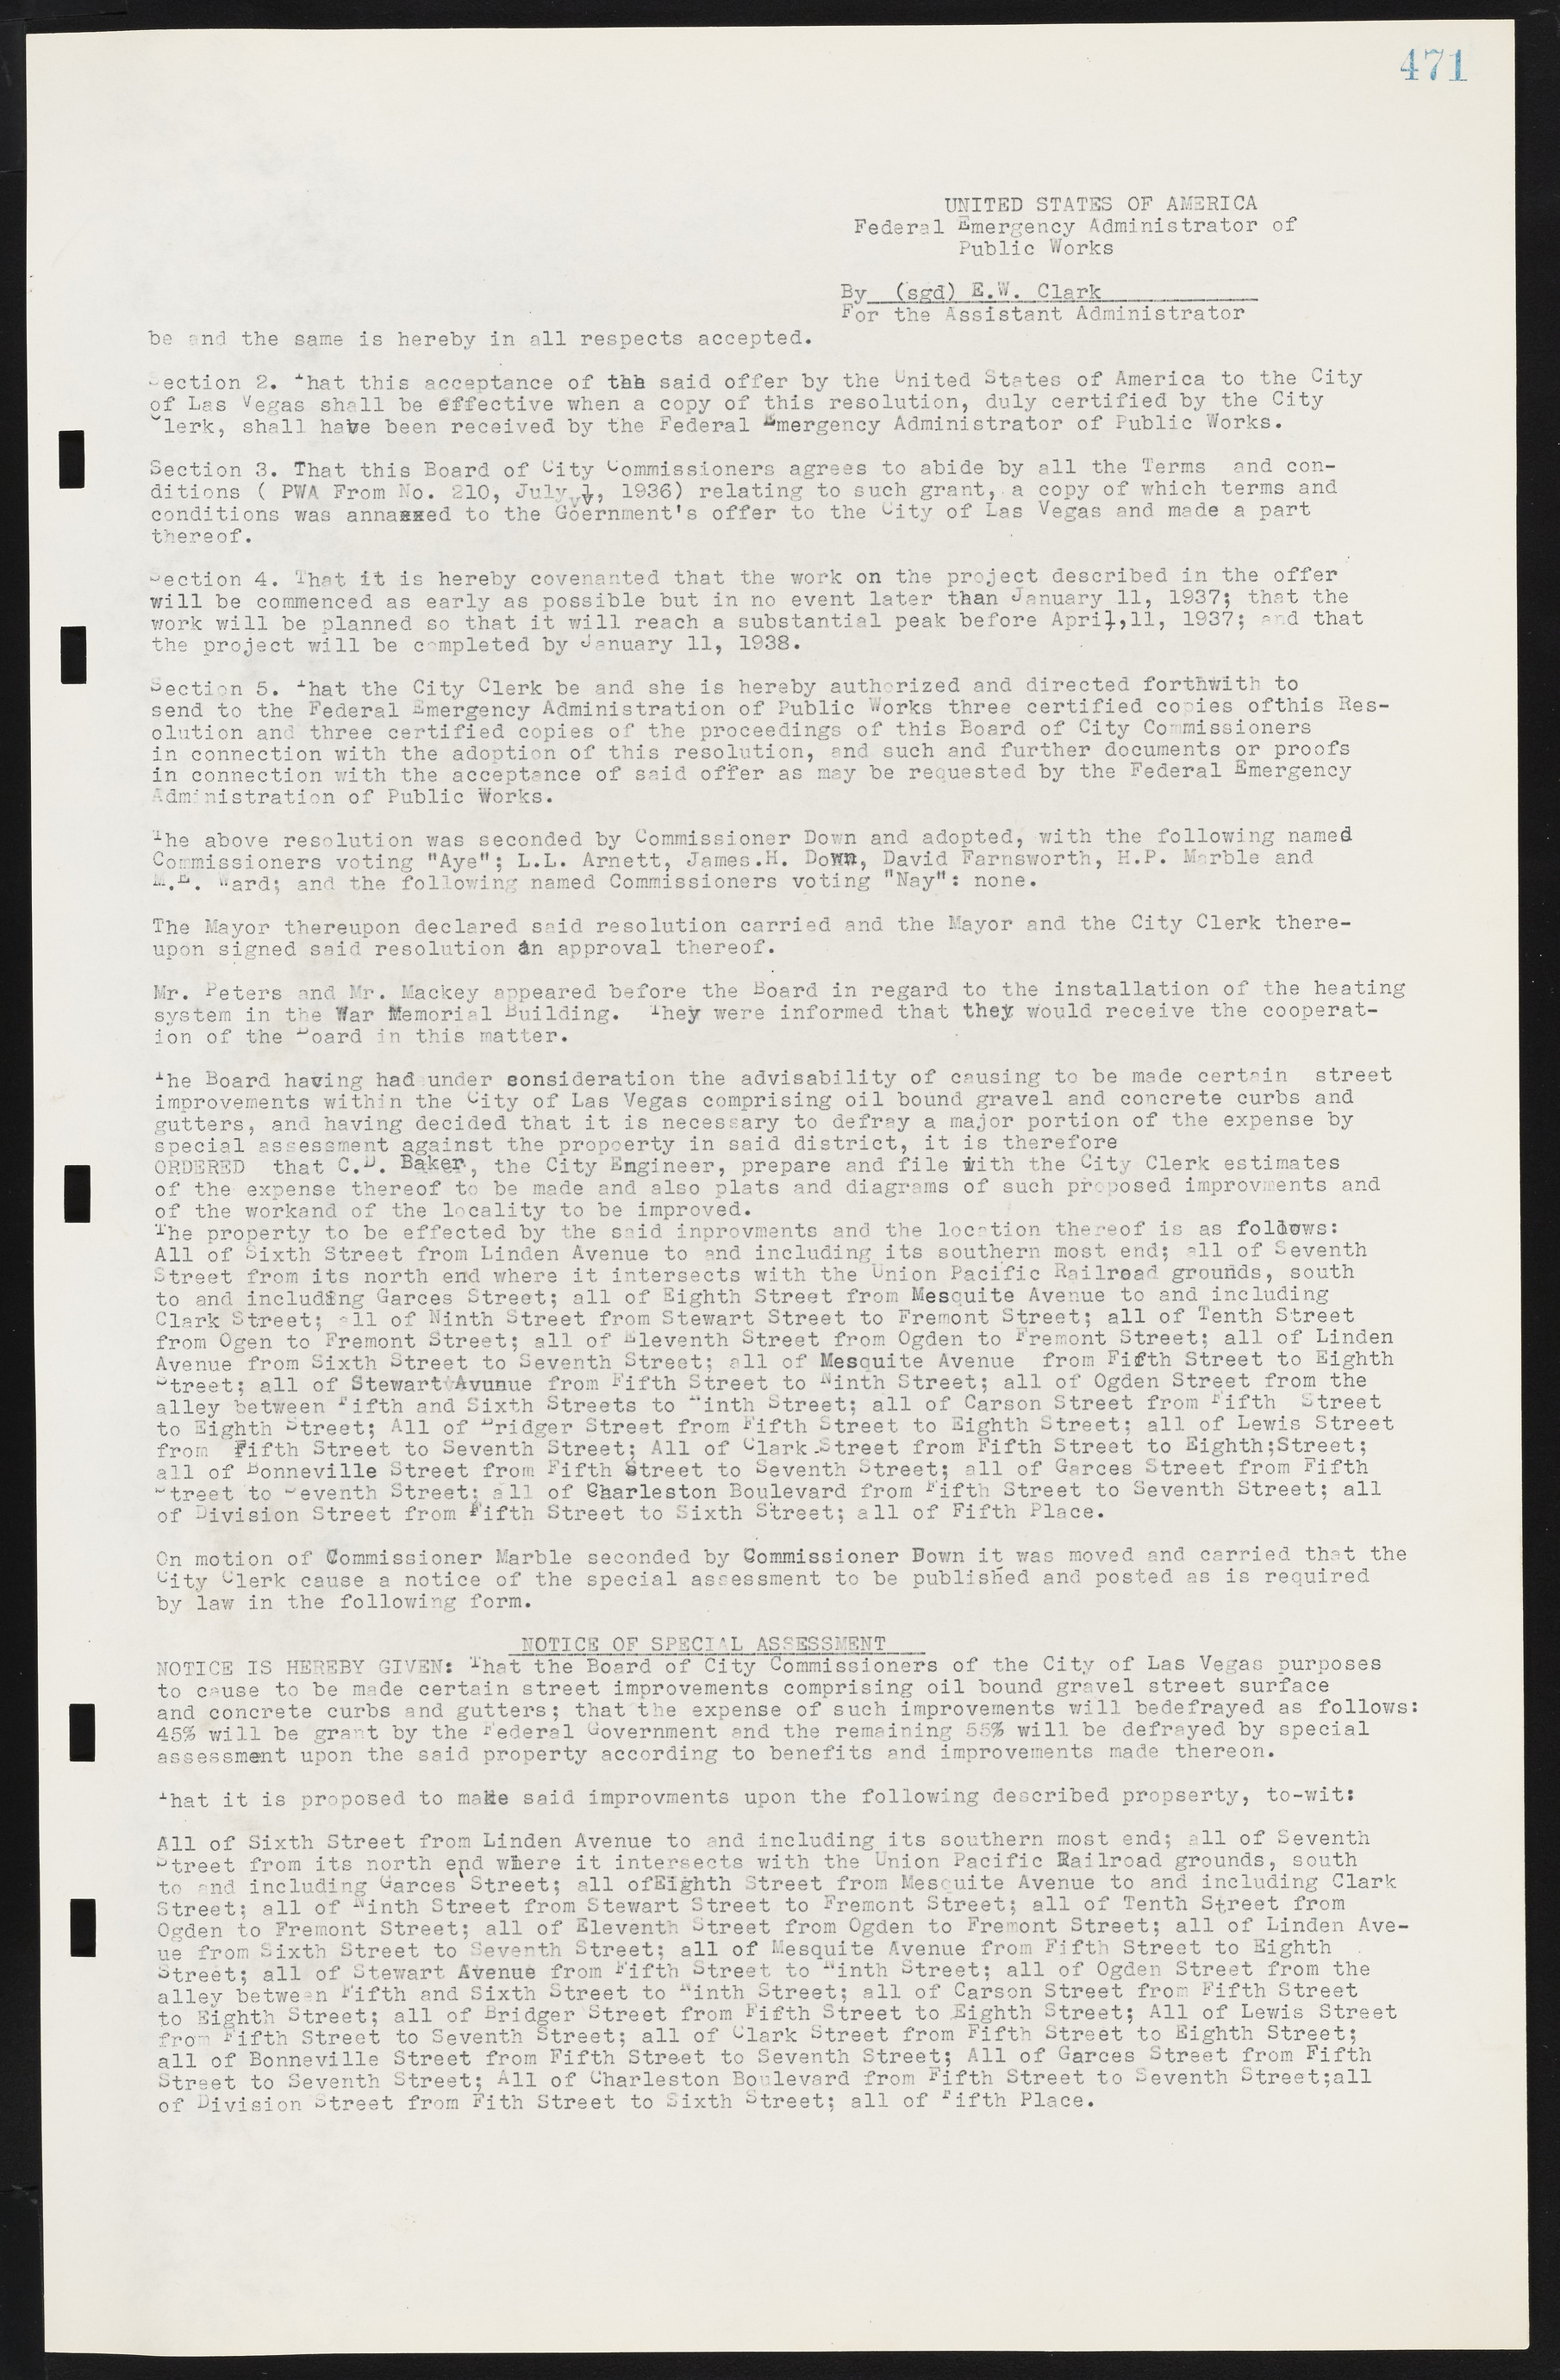 Las Vegas City Commission Minutes, May 14, 1929 to February 11, 1937, lvc000003-478